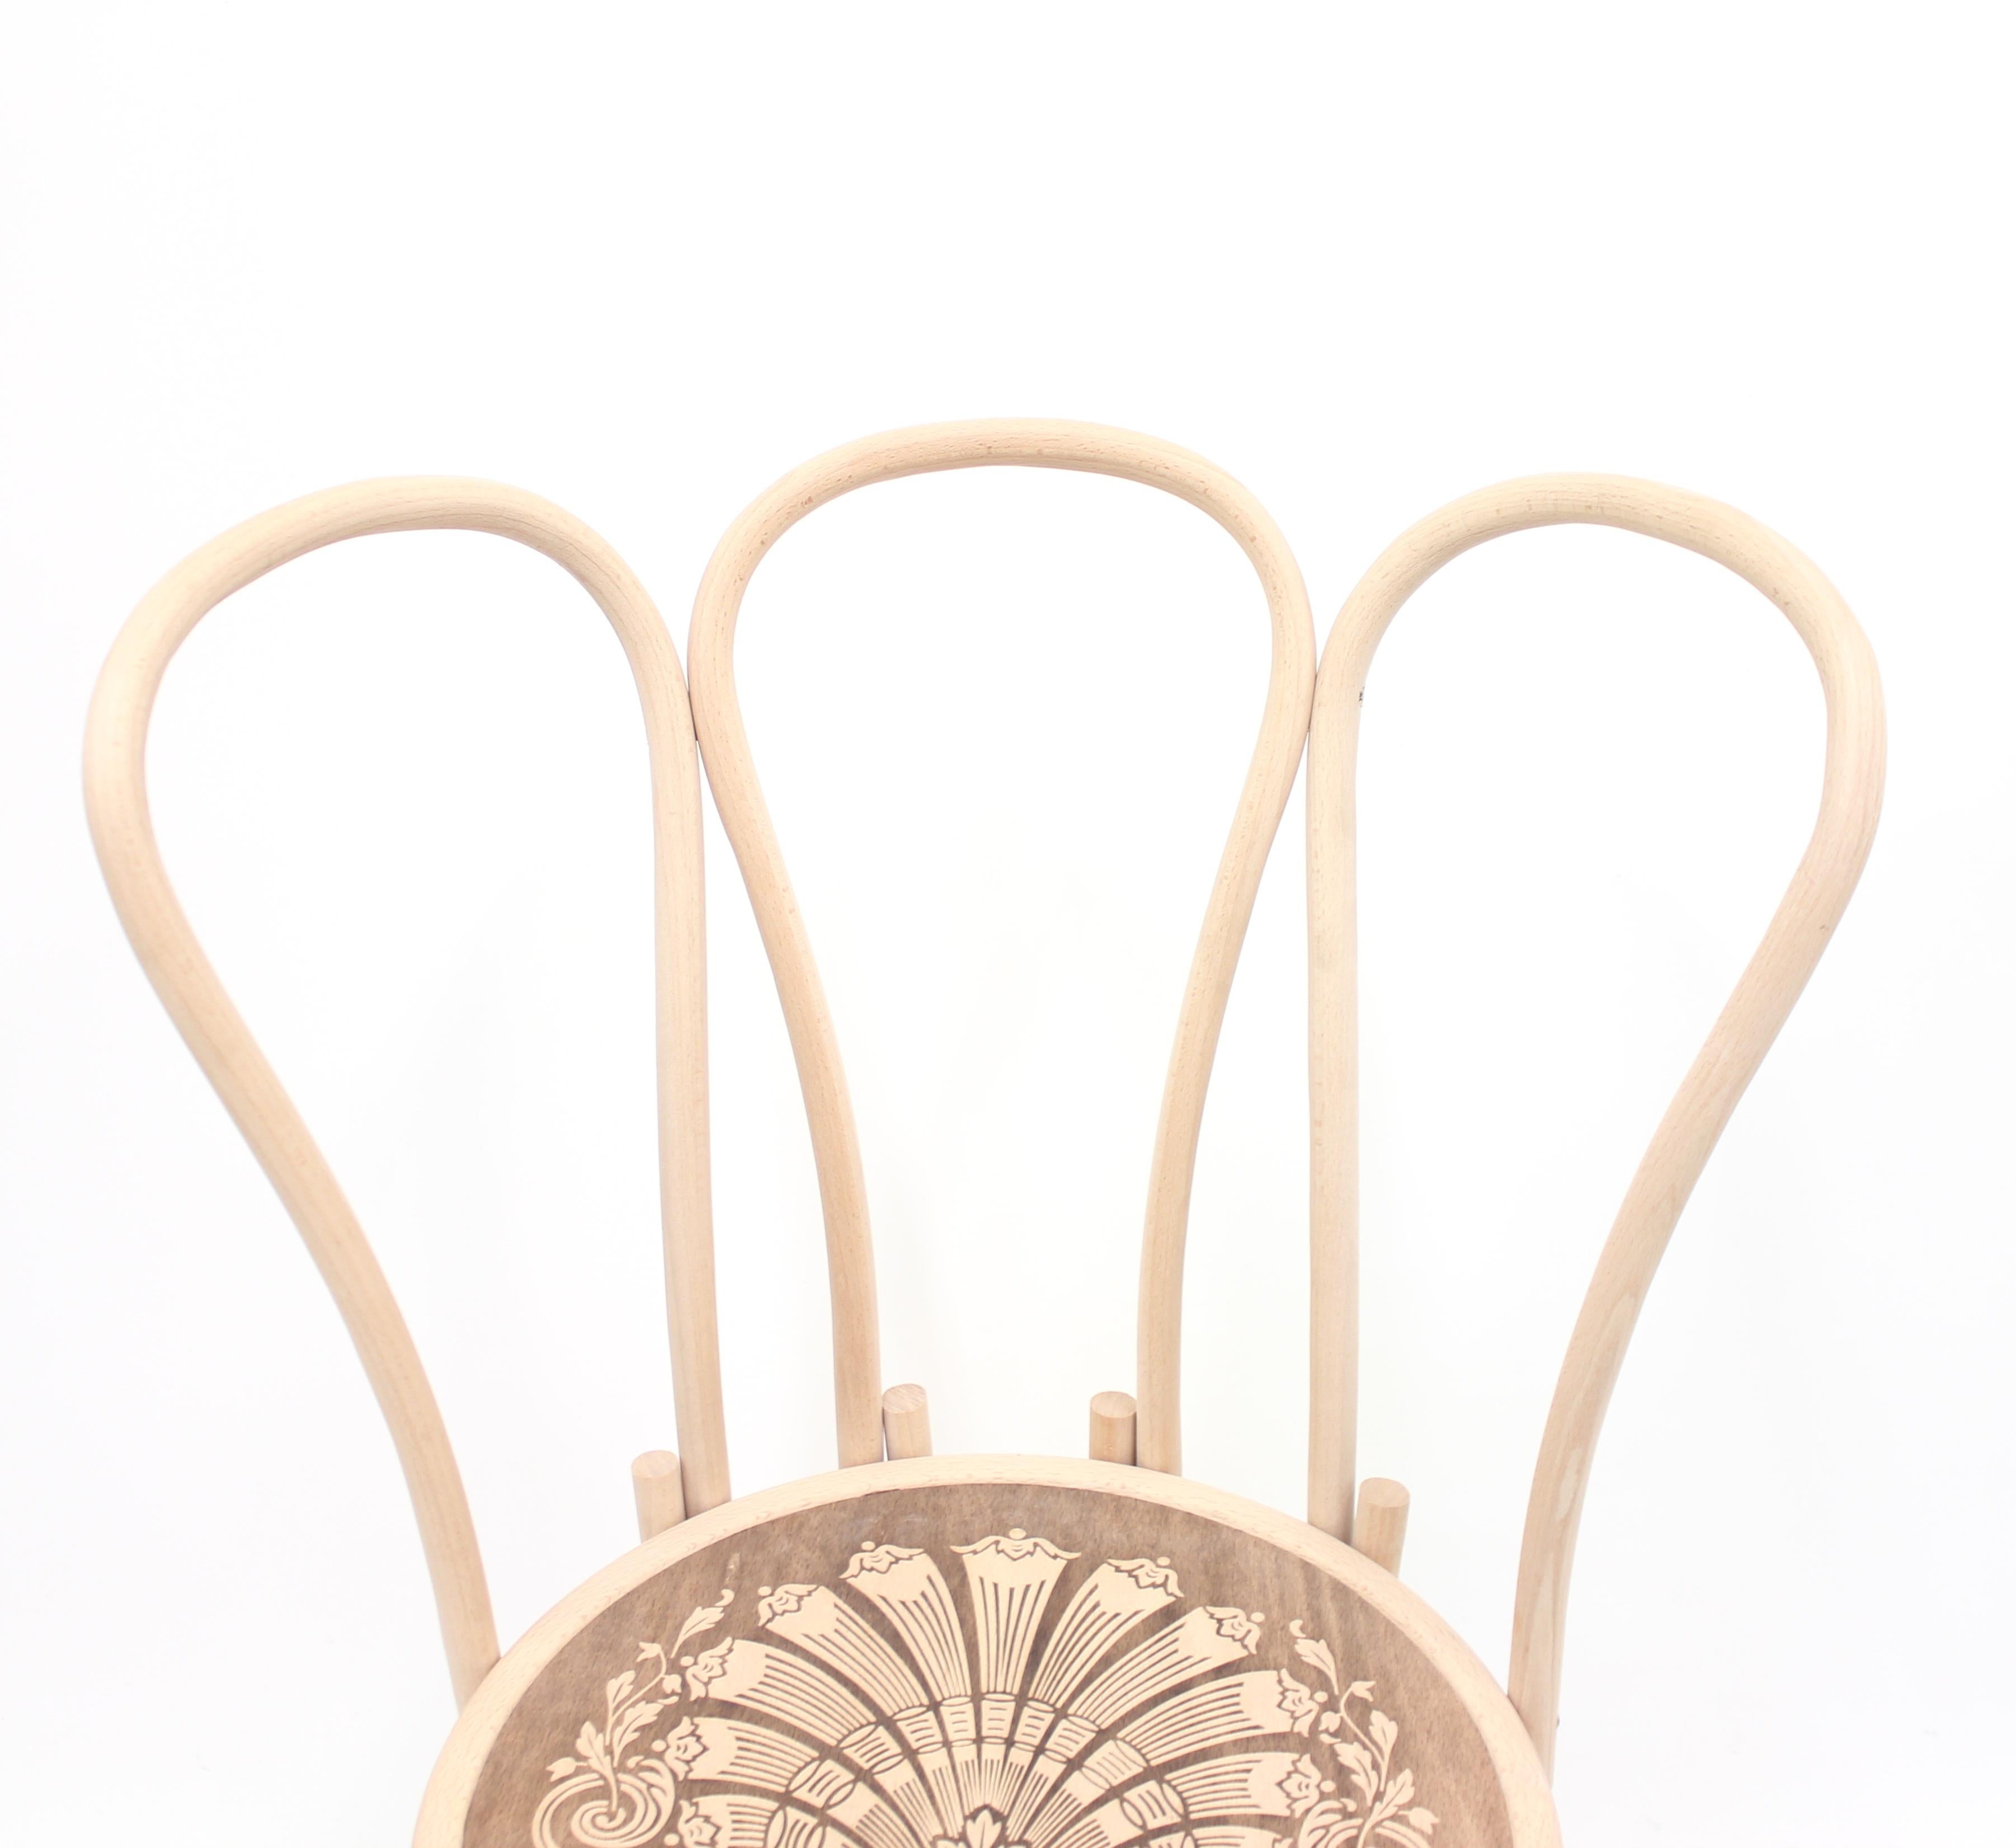 Back of the Chairs by Martino Gamper for the Conran Shop/Thonet, 2008 For Sale 1